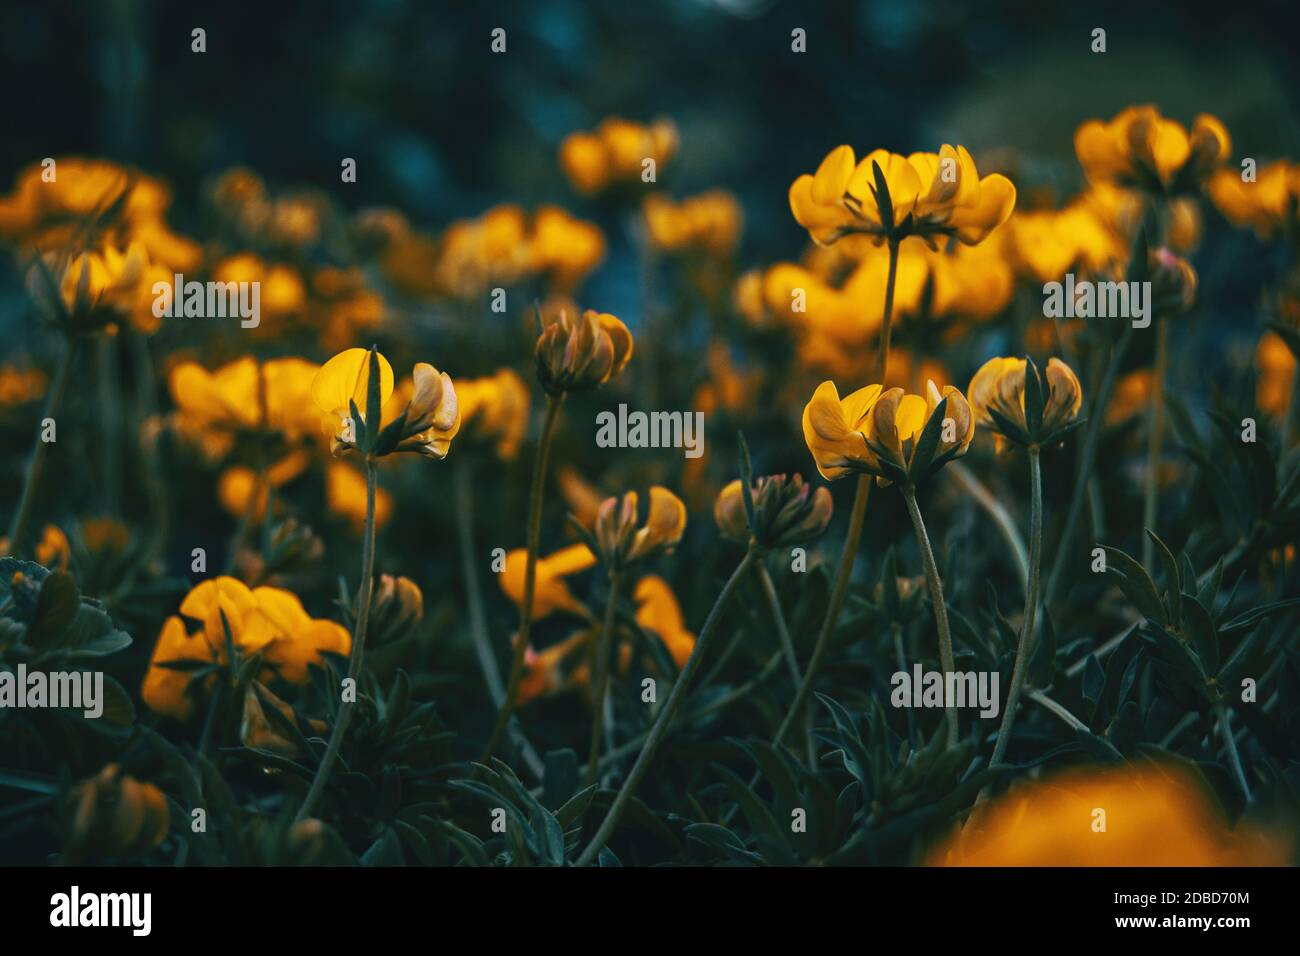 Close-up of some yellow flowers of medicago arborea growing in nature Stock Photo